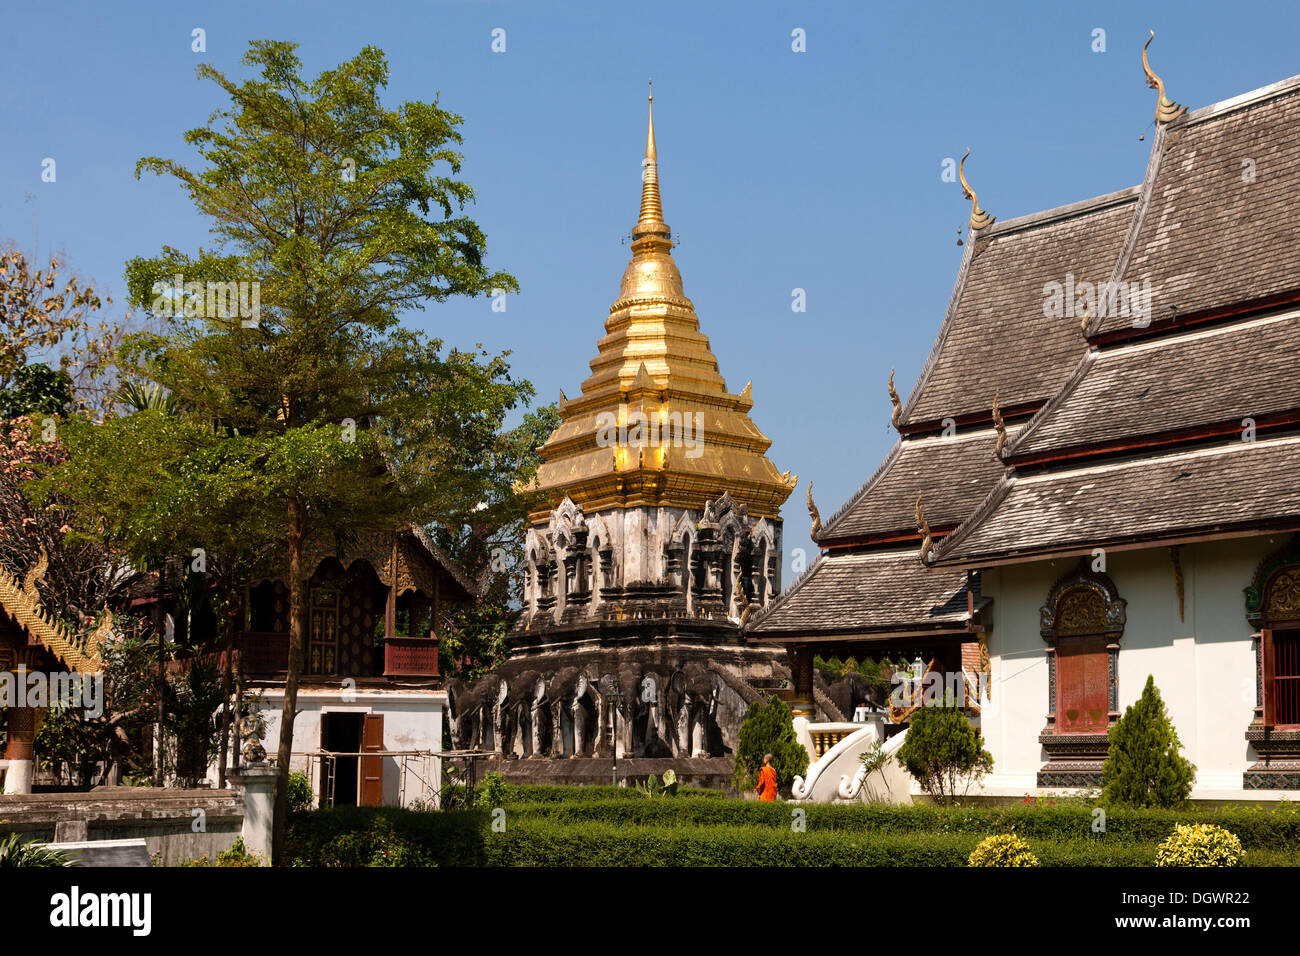 Chedi with elephant statues, Wat Chiang Man, Chiang Mai, Northern Thailand, Thailand, Asia Stock Photo